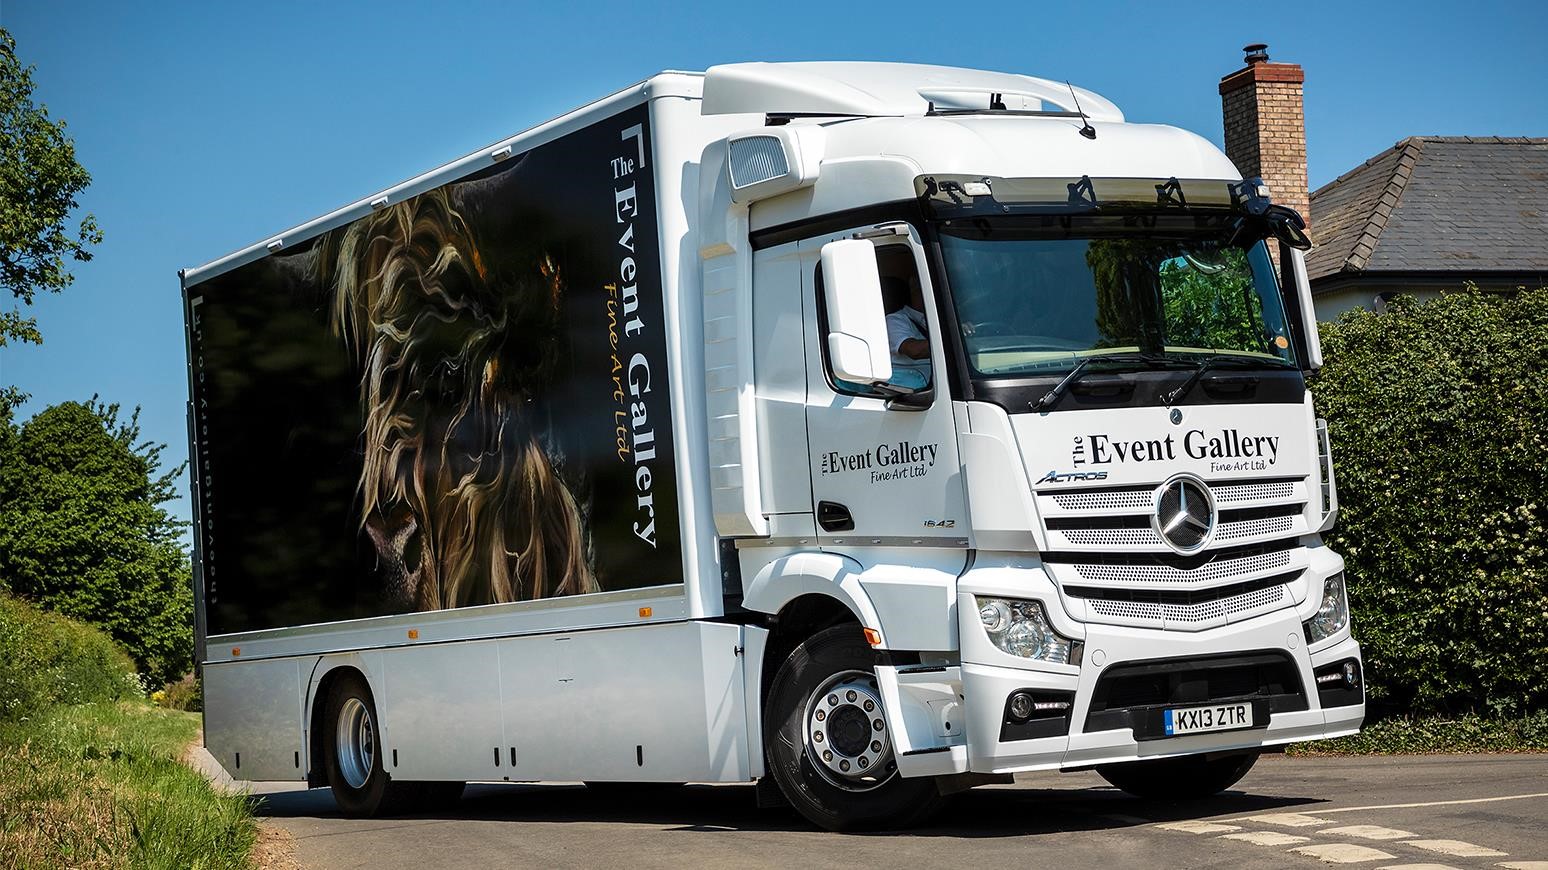 The Event Gallery Fine Art Bought A Used Mercedes-Benz Actros Just Before COVID-19 Restrictions Began